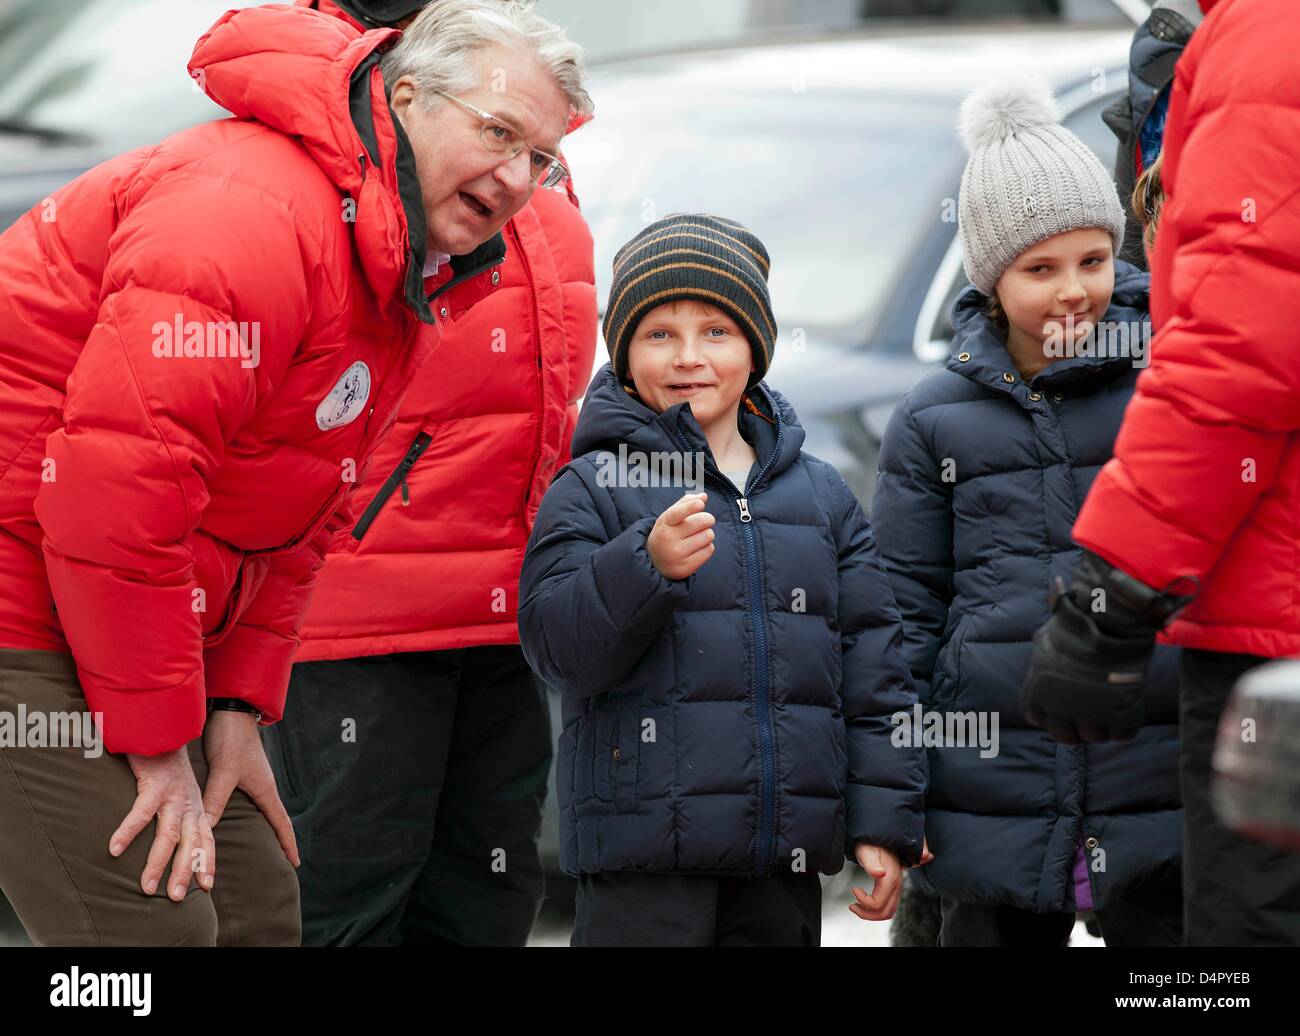 Prince Sverre Magnus of Norway (C) asks the mayor of Oslo, Fabian Stang (L), if photographers are all paparazzi... at right Princess Ingrid Alexandra. Pictured during their arrival at the ski jumping championship at Holmenkollen near Oslo. Oslo / Holmenkollen, 17-03-2013 Photo: RPE-Albert Nieboer / NETHERLANDS OUT Stock Photo